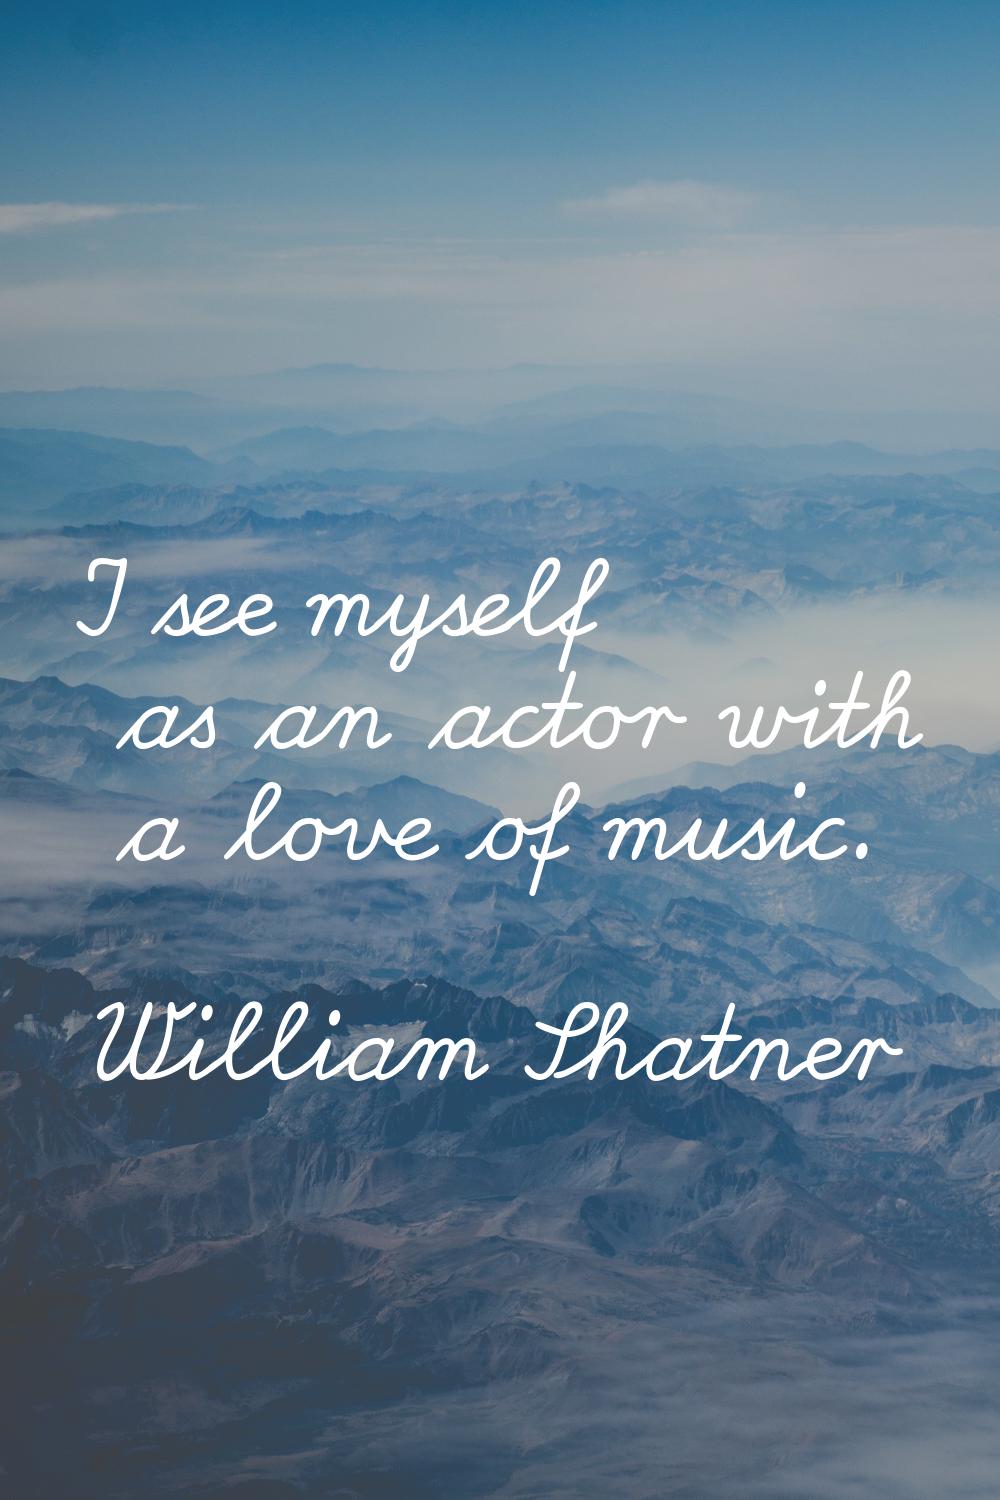 I see myself as an actor with a love of music.